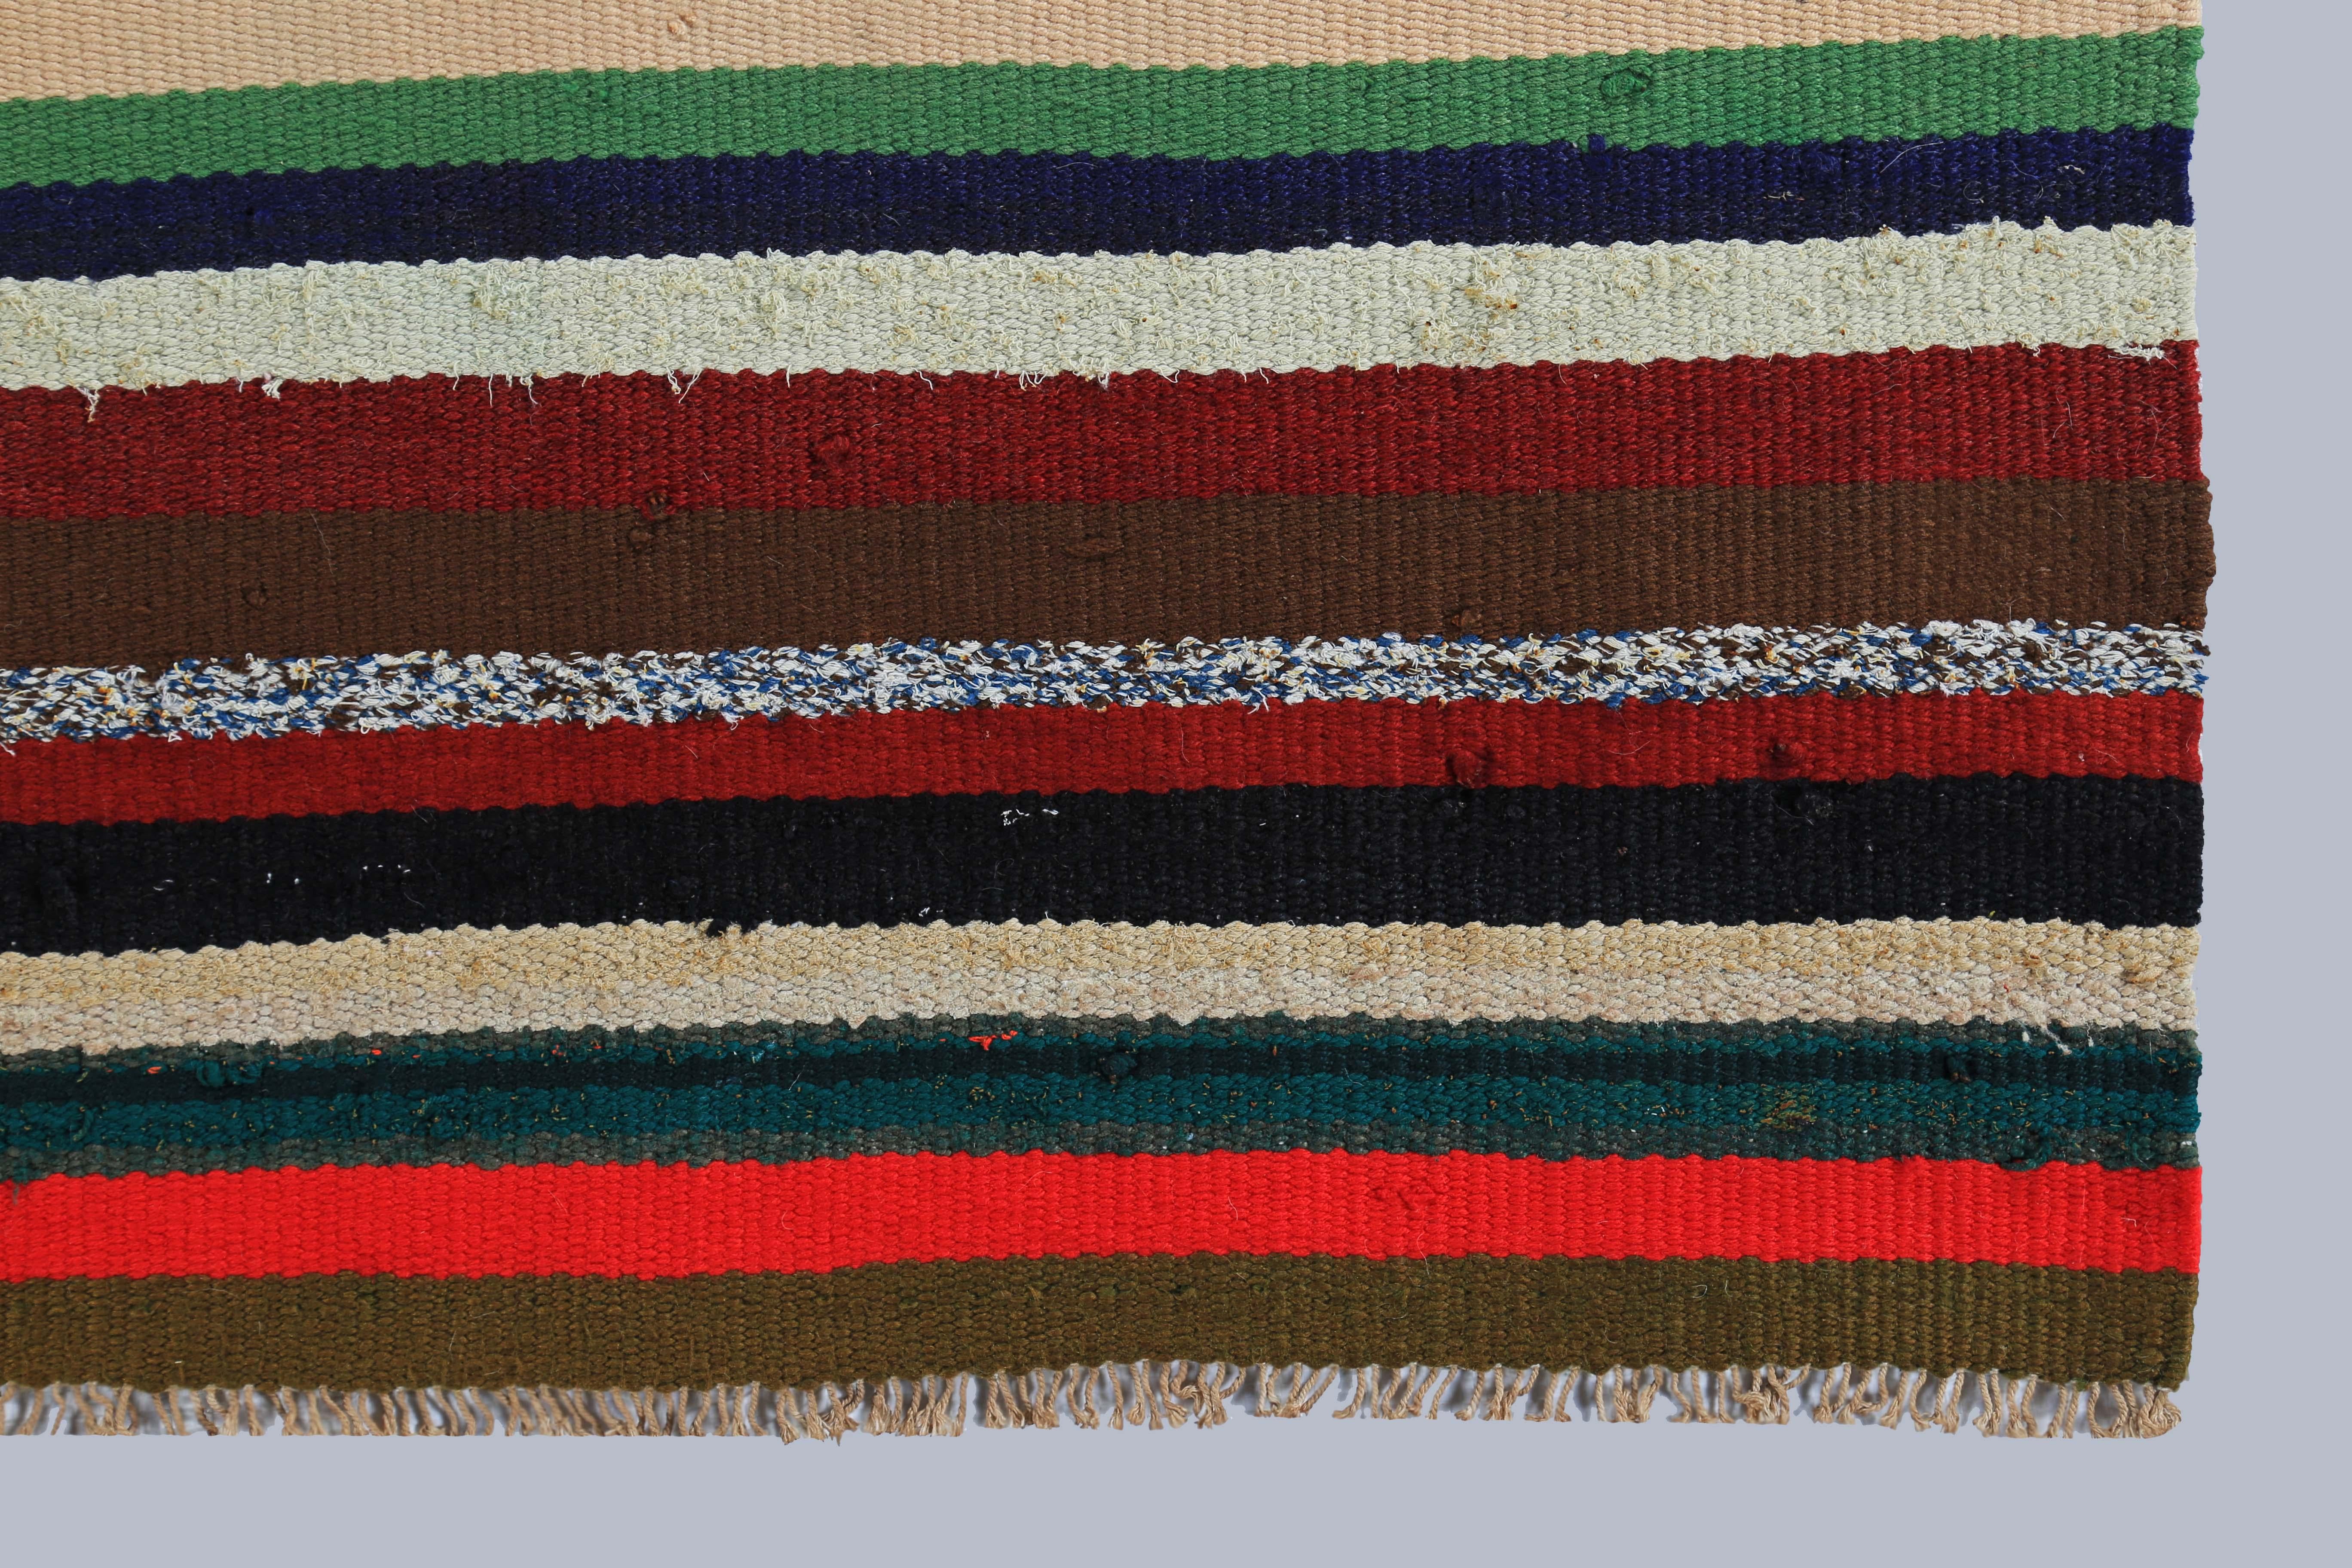 Hand-Woven Modern Turkish Kilim Runner Rug with Red, Orange and Black Stripes For Sale